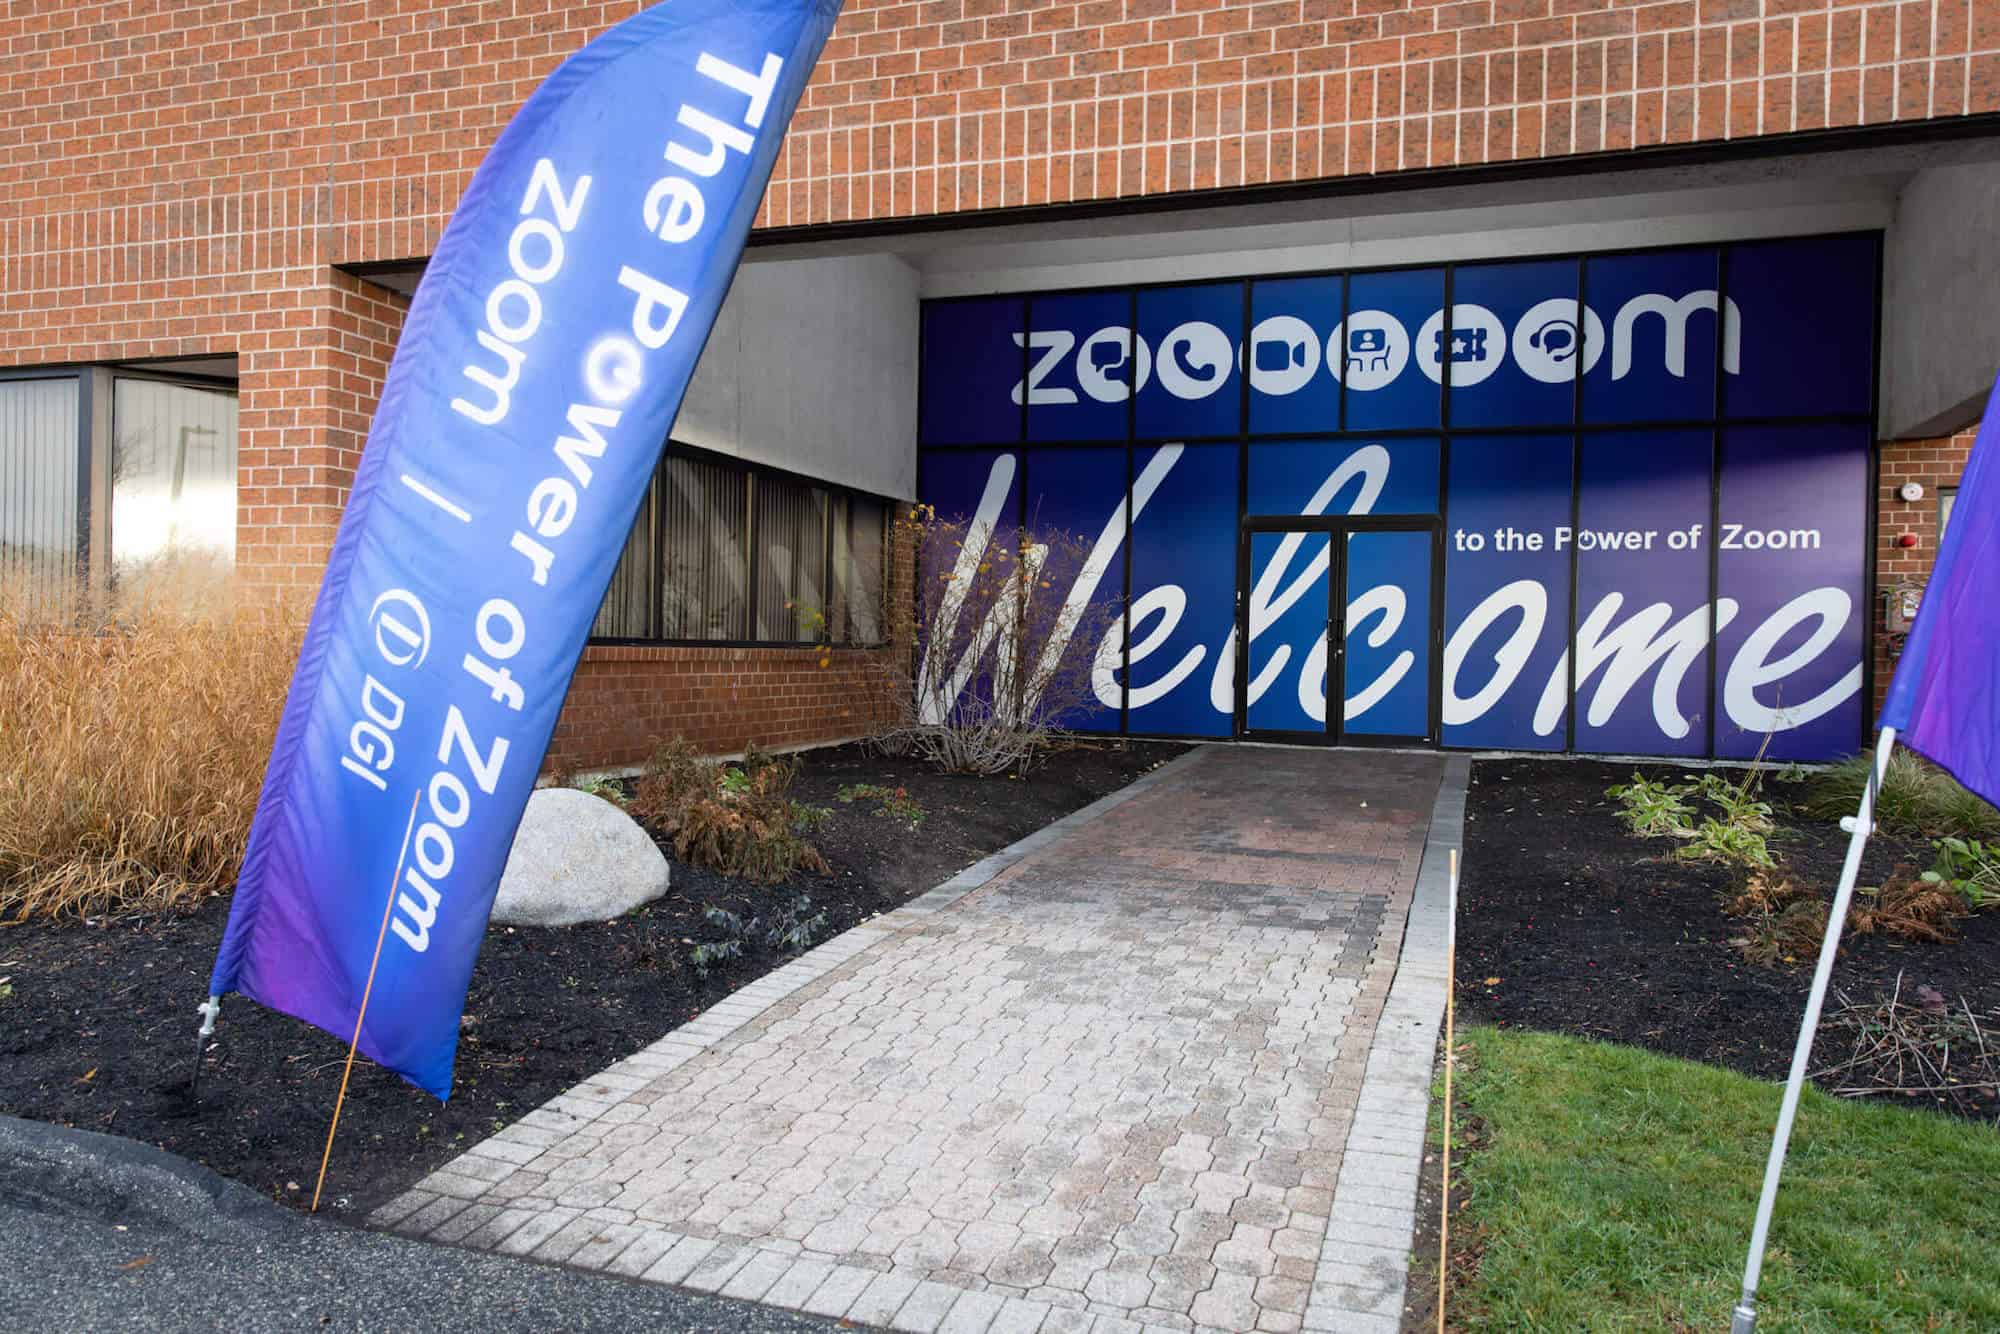 Trade show signage covering the glass entrance to a brick building. Two additional banners are set up beside a stone walkway that leads up to the building's front door.